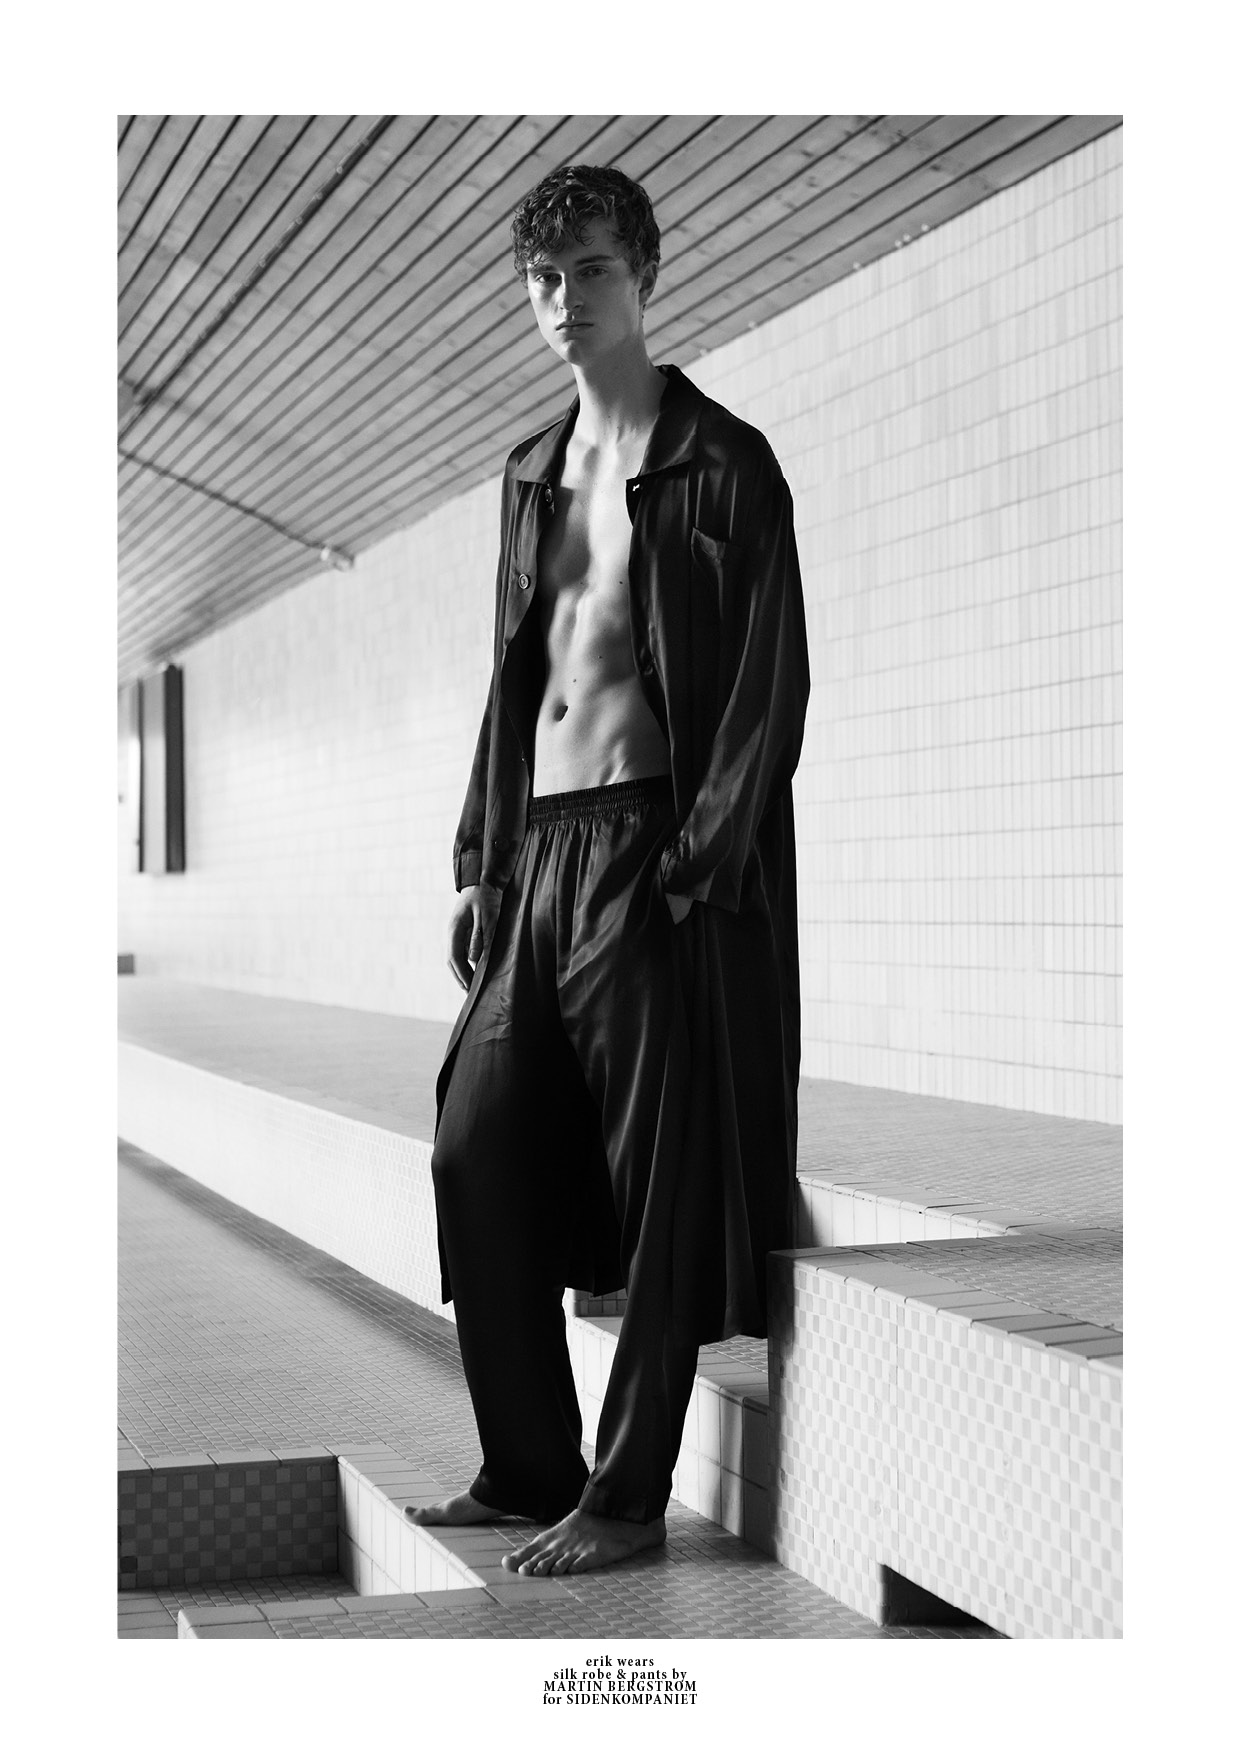 The Pool by Johan Nilsson for Client Magazine #15 | Client Magazine